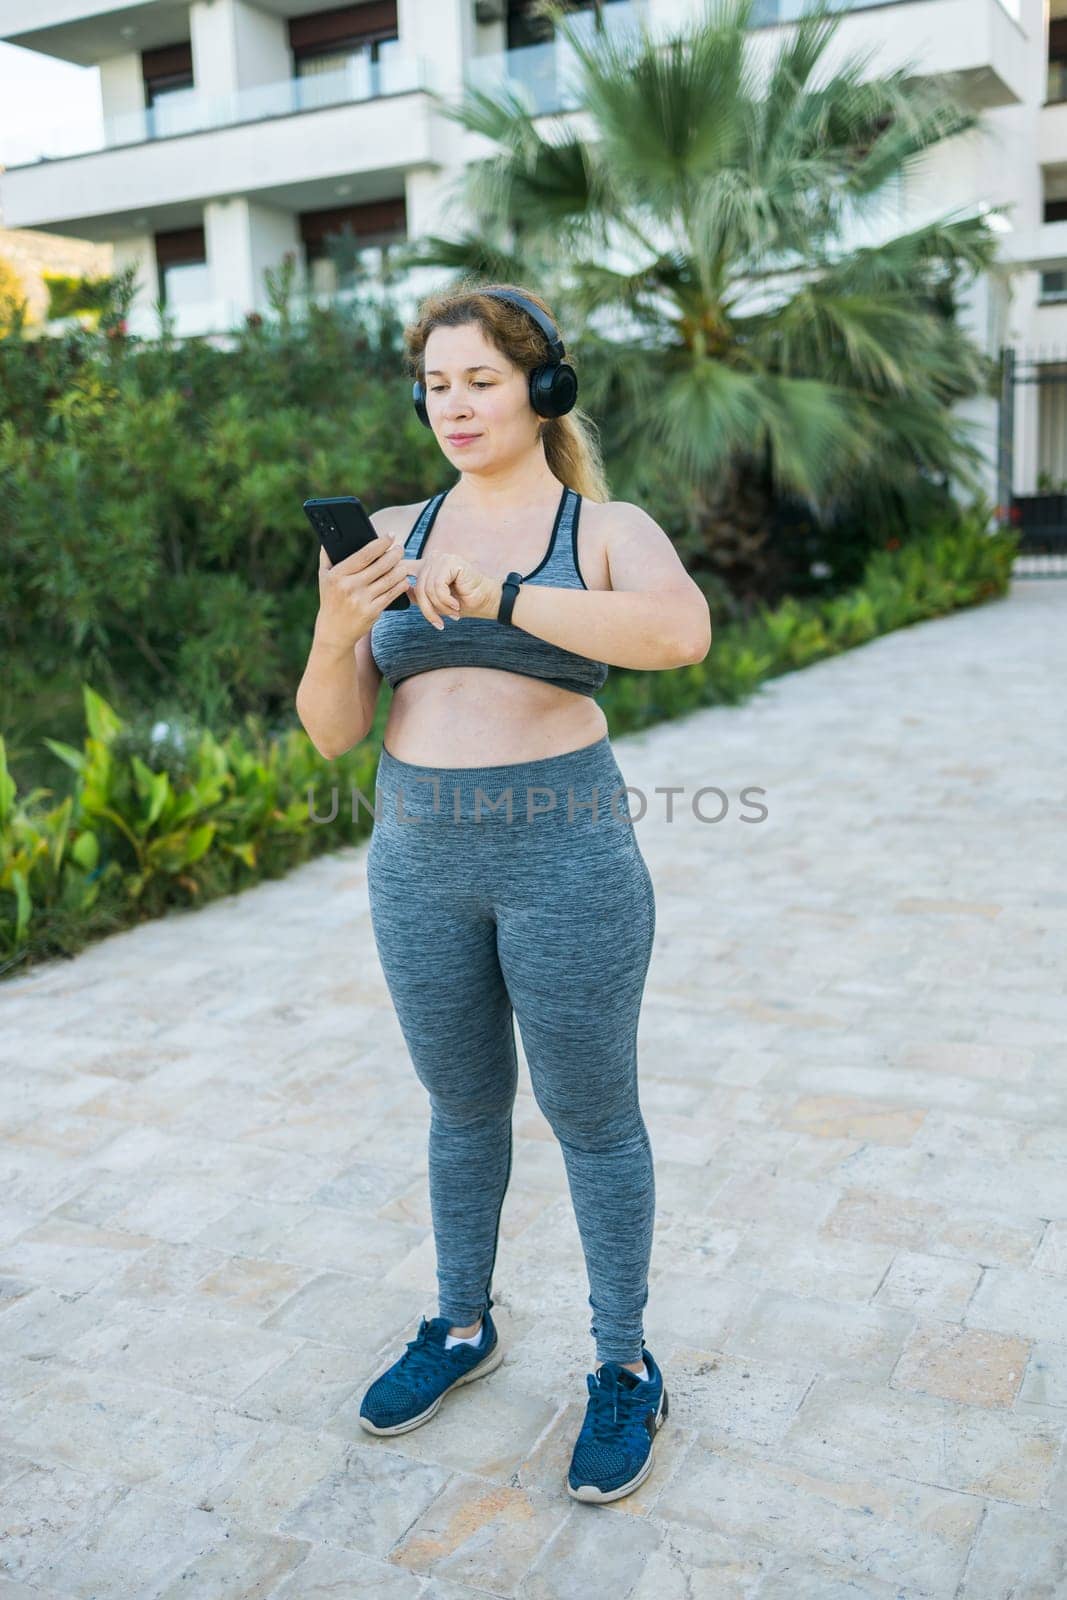 Fat woman checking time or heart rate from smart watch. Exercise or running outdoors for weight loss idea concept. Wellness and wellbeing by Satura86